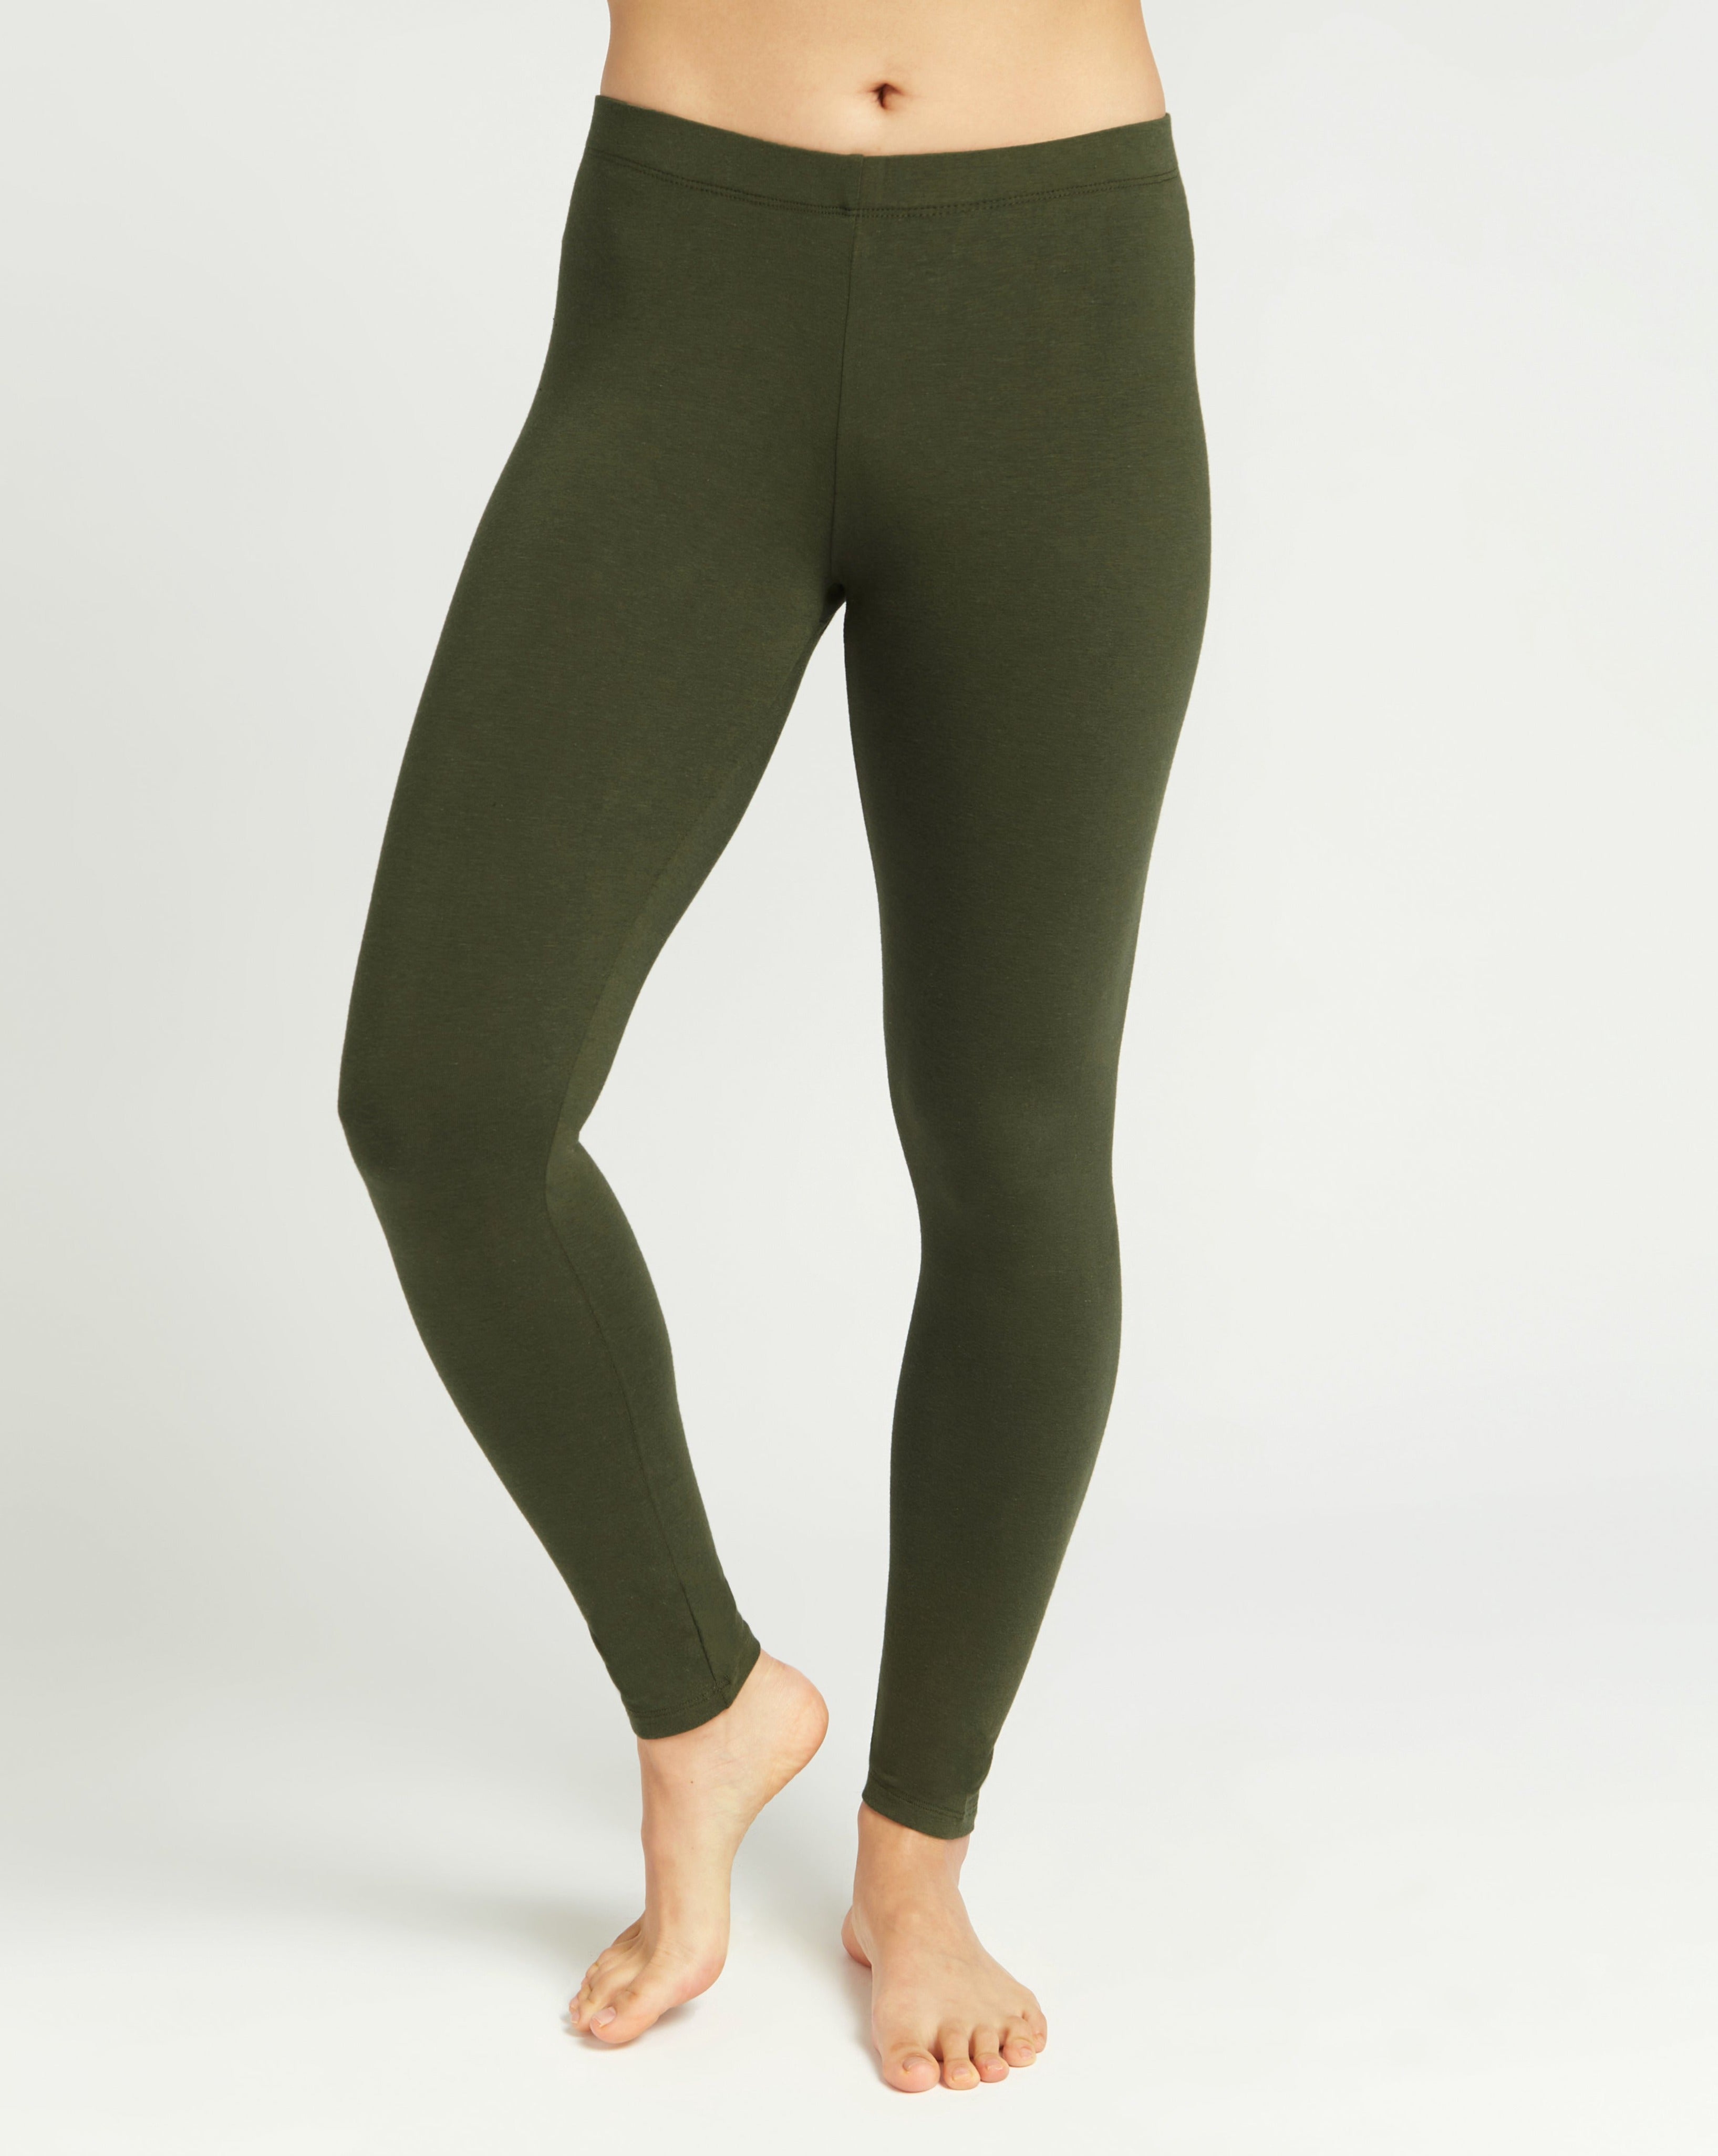 Shop Plus Size Bamboo Breezy 7/8 Legging in Green, Sizes 12-30